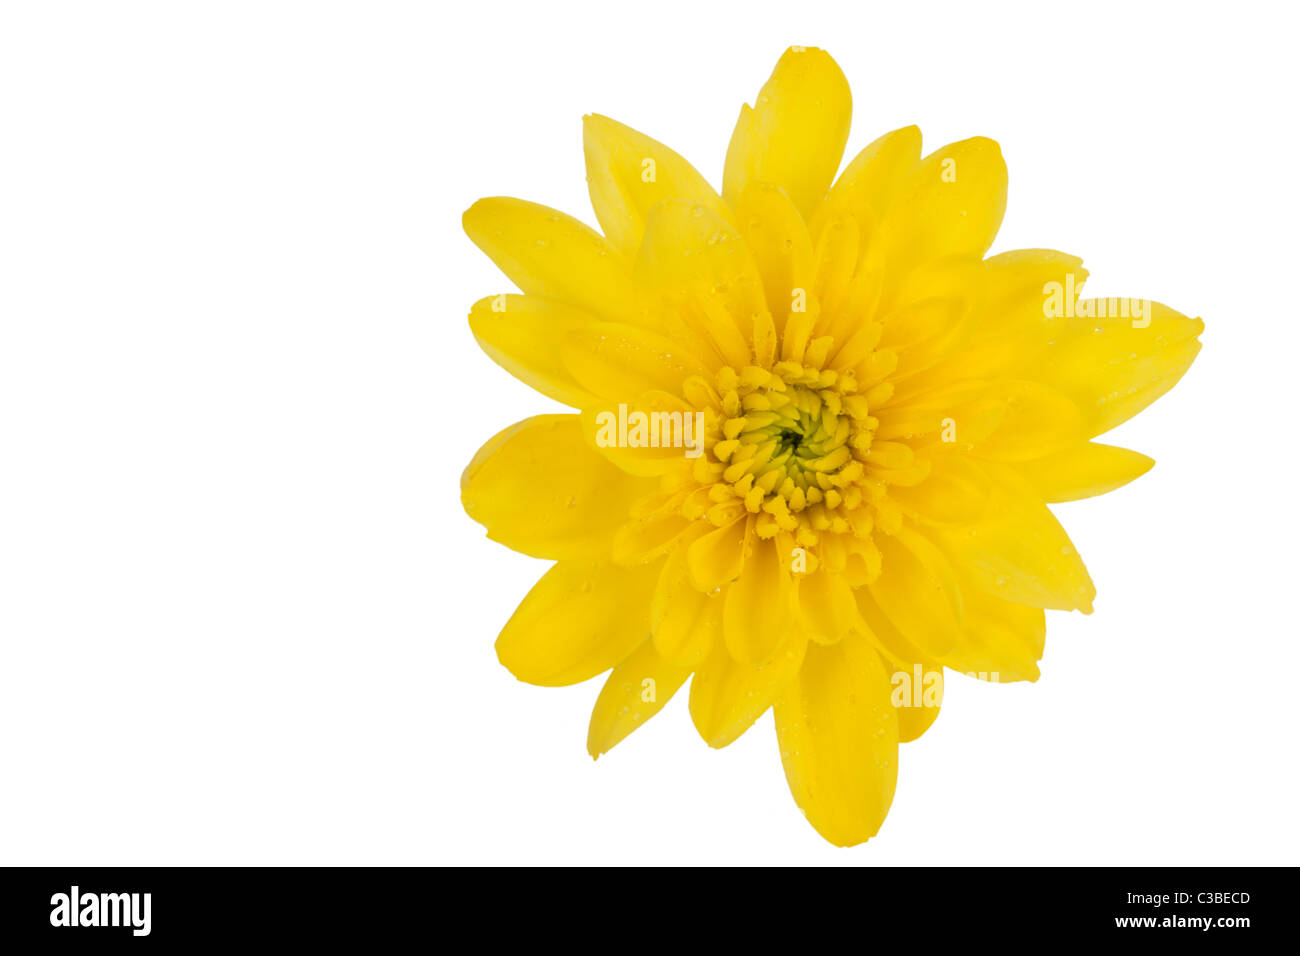 yellow chrysanthemum isolated on a white background Stock Photo